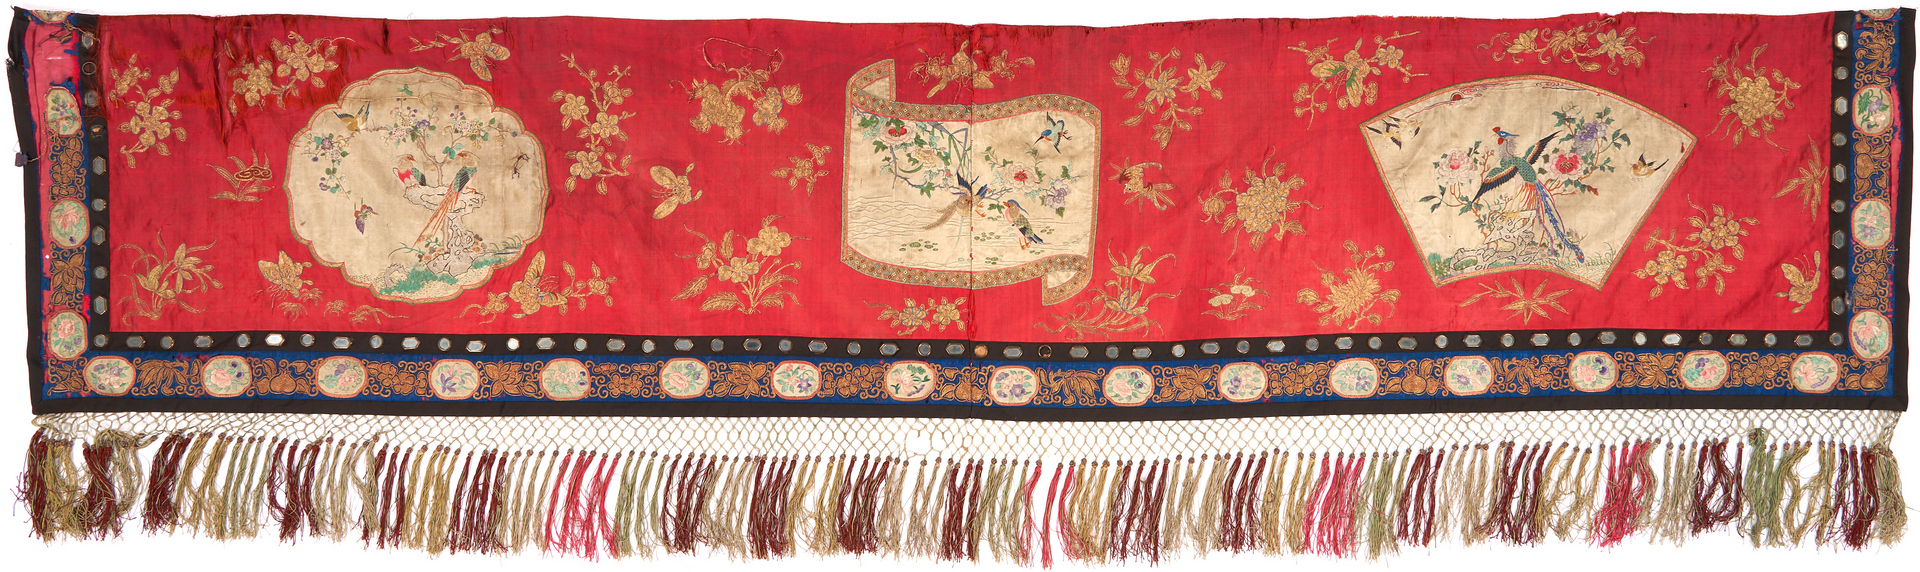 Lot 47: Chinese Embroidered Red Silk Kesi or Shawl & Blue Asian Court Robe